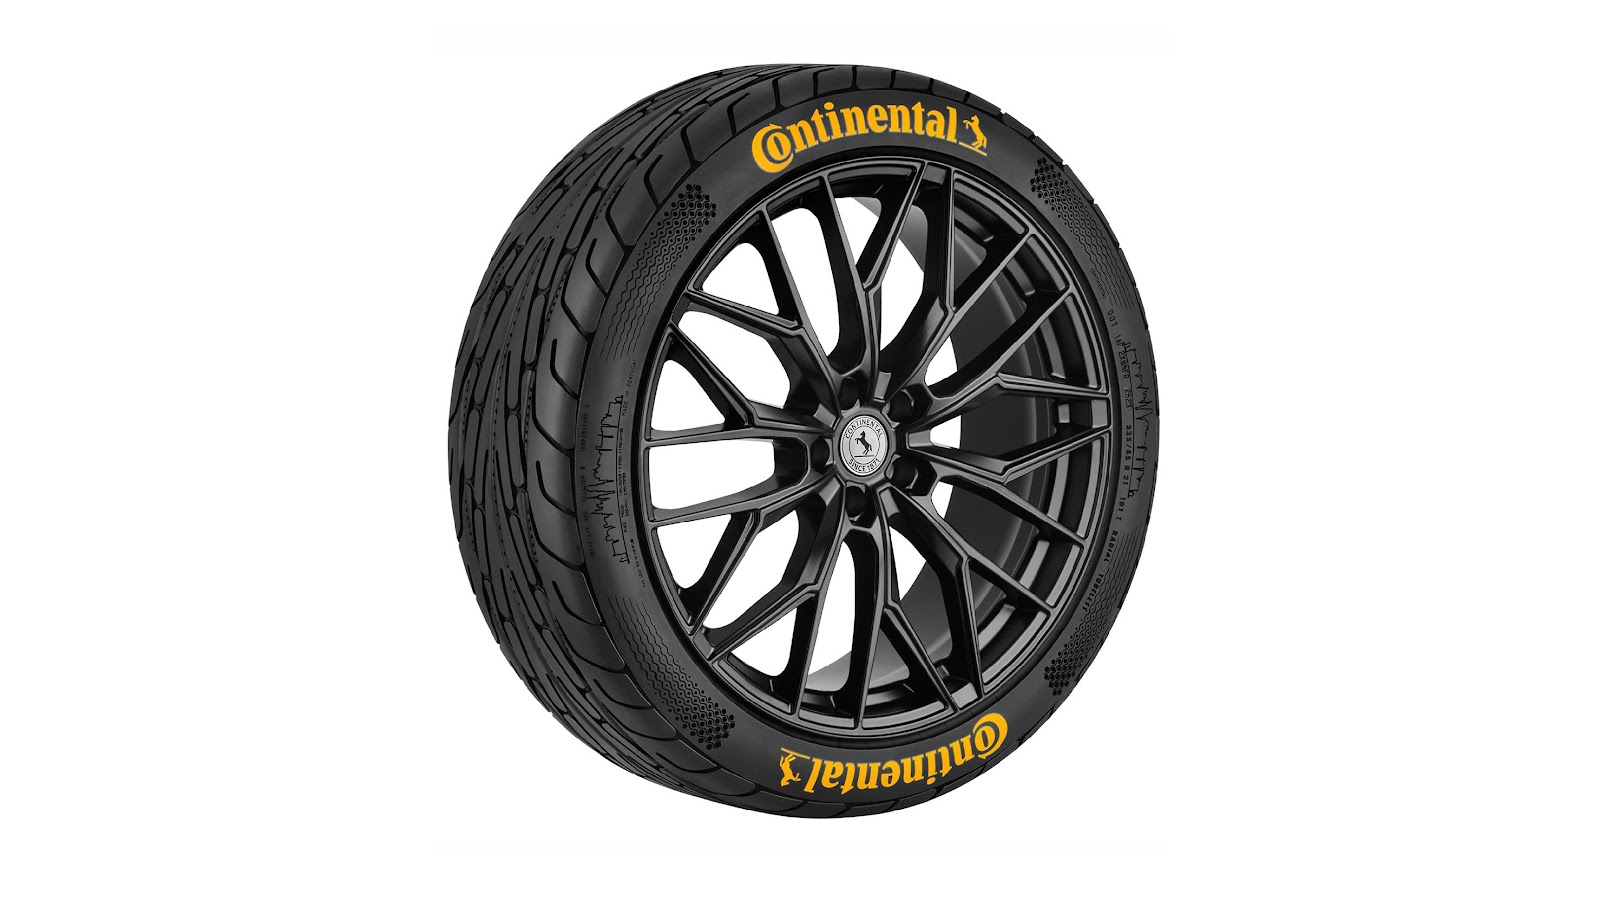 A black tire with yellow text on it

Description automatically generated